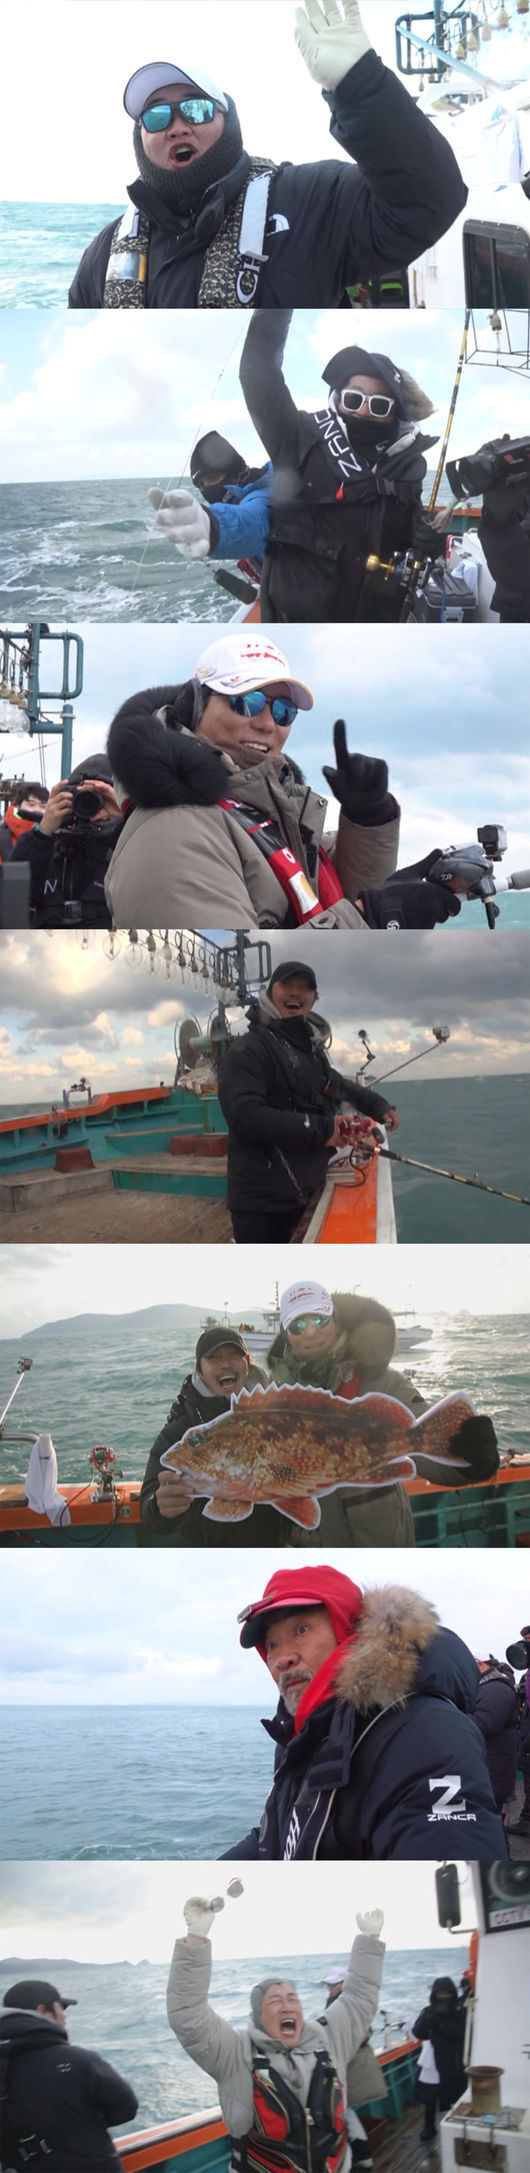 City fishermen play the last fishing battle with the fateful mate.In the 59th episode of Channel A entertainment program, City Fisher 2 (hereinafter referred to as City Fisher 2), which is broadcast on the 4th, the city fishermen are playing last competition in Goheung, South Jeolla Province with Hur Jae and KCM.In the day of fishing, where the big game of four or more big games and team general weights are covered, two team games are played.There is a lot of attention in the field because there has been a tense tension that I have never seen before, ahead of the election of the fate that came to the end of Season 2.KCM, who expressed his heartfelt desire to say, I miss Taegon at this moment, said before the election, I am a miracle, and when I became a team with Lee Tae-gon, I cheered and exploded the tension.The two men who played rival Battle meet as friendly in the enemy and expect what team chemistry will emit.Lee Deok-hwa, Lee Soo-geun, Hur Jae and Ji Sang-ryuls team also showed a unique match and predicted a hot battle.Hur Jae said, Lets show something! Lee Soo-geun said, Teach game is only trust me.But Kim Joon-hyun, who was paired with Lee Kyung-kyu, said, Brother!I grabbed something, please! He laughed at Lee Kyung-kyu, who complained to Lee Deok-hwa.Kim Joon-hyun said, We have to ride season 3 with a brilliant finale.Lets burn the last one, he said, showing a strong desire, raising the curiosity about the result of the team game fishing.On the other hand, Lee Kyung-kyu said that he was tired of KCM and then hit Hur Jae, saying, I told you not to call me.Ipansapan fishing battle, which was fierce until the end, amplifies the curiosity about this broadcast whether it can be finished warmly.channel A offer